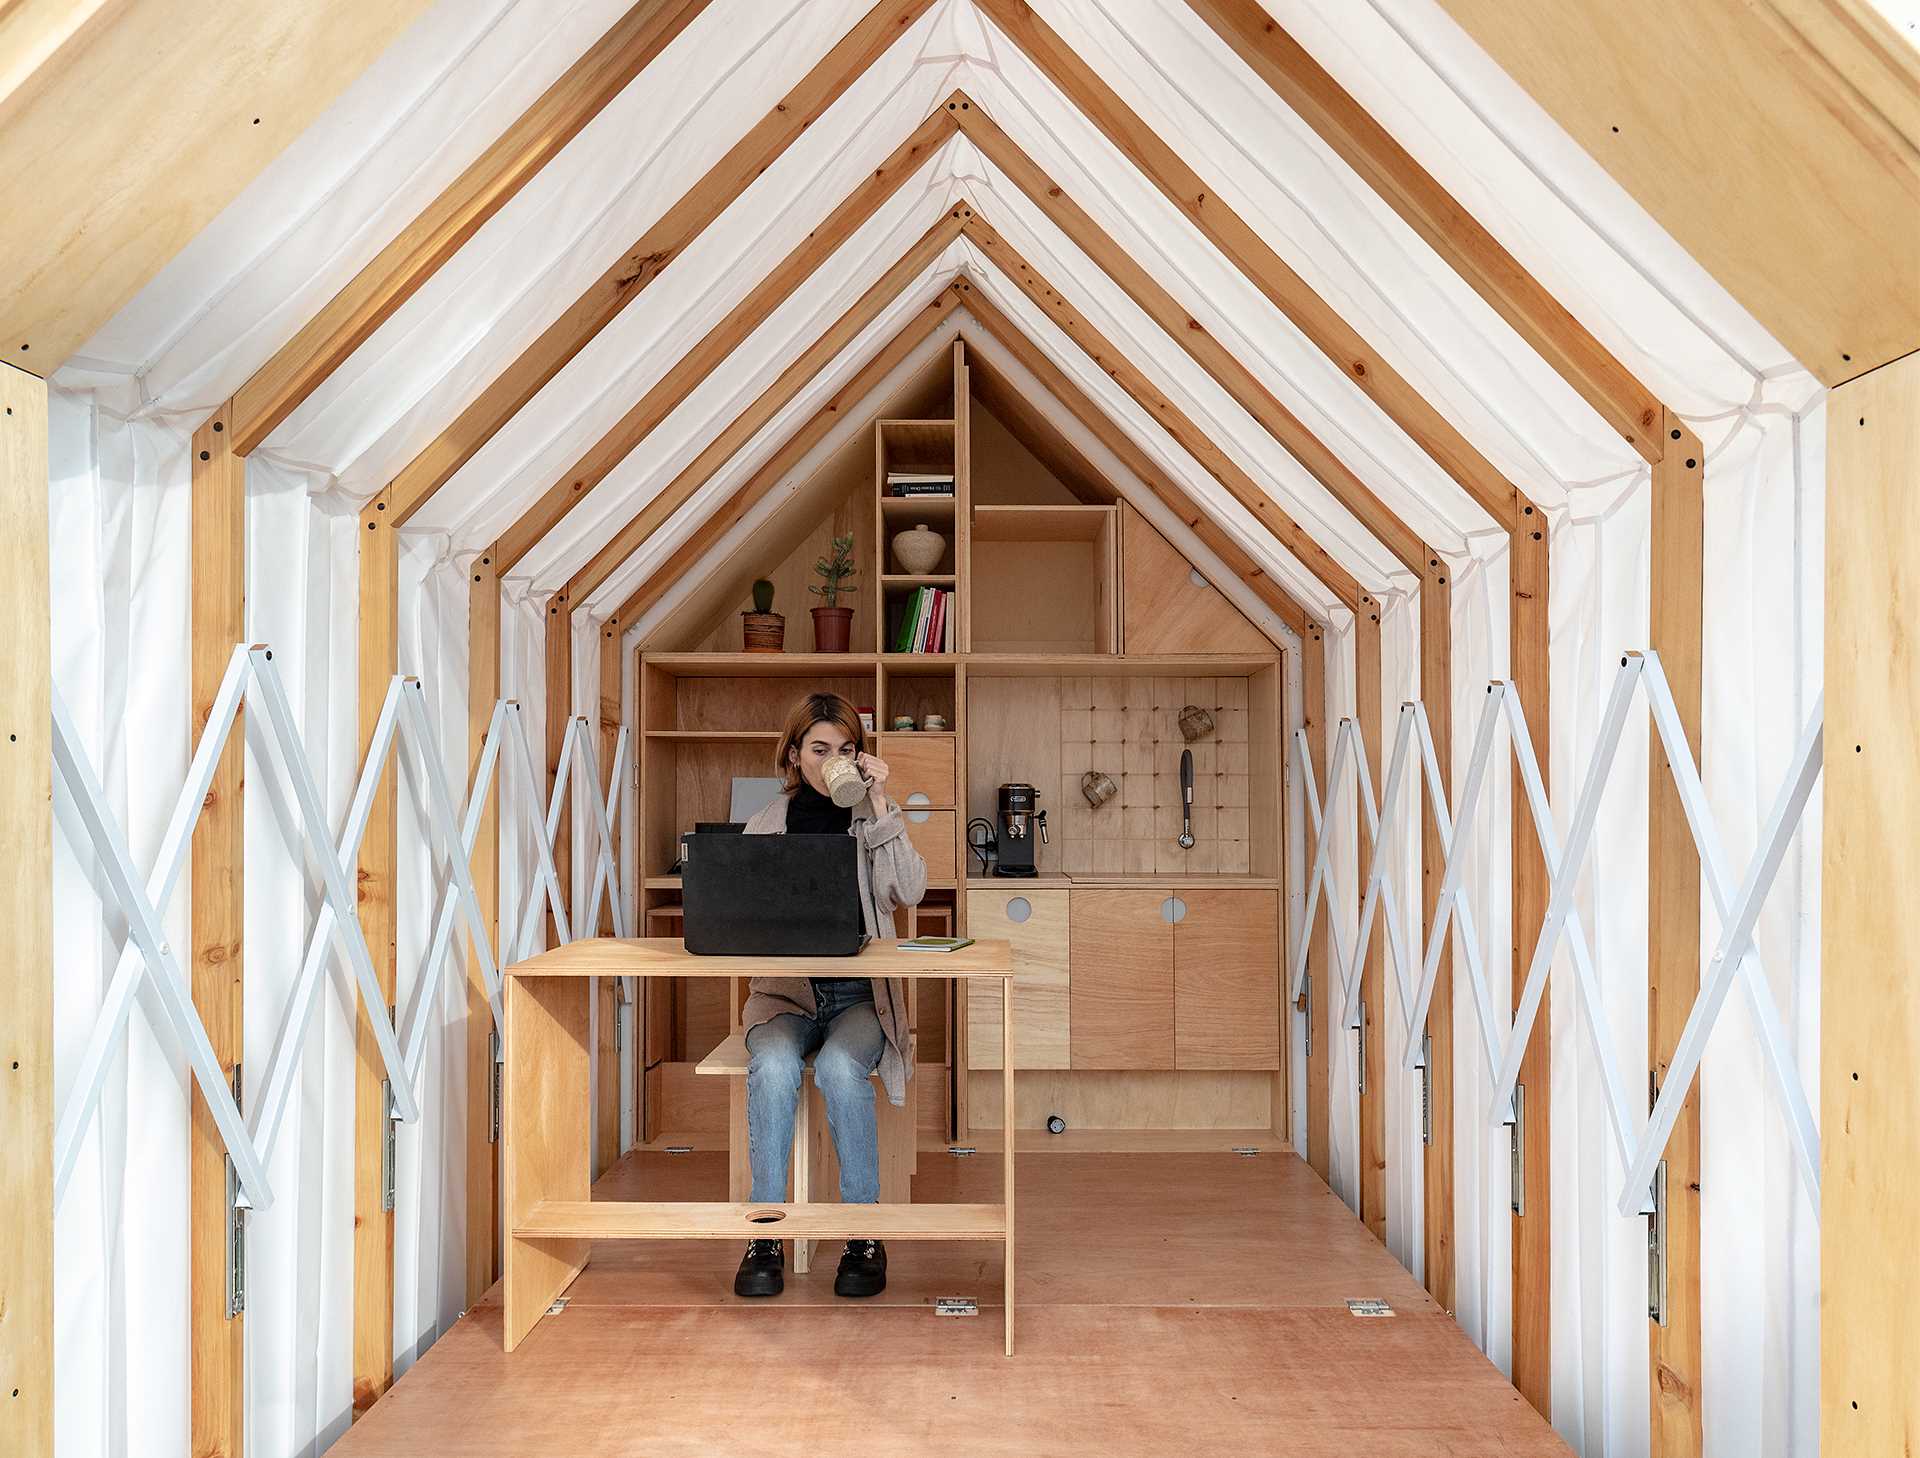 A small cabin-like room that expands when needed, and makes room for an office, or additional living space.